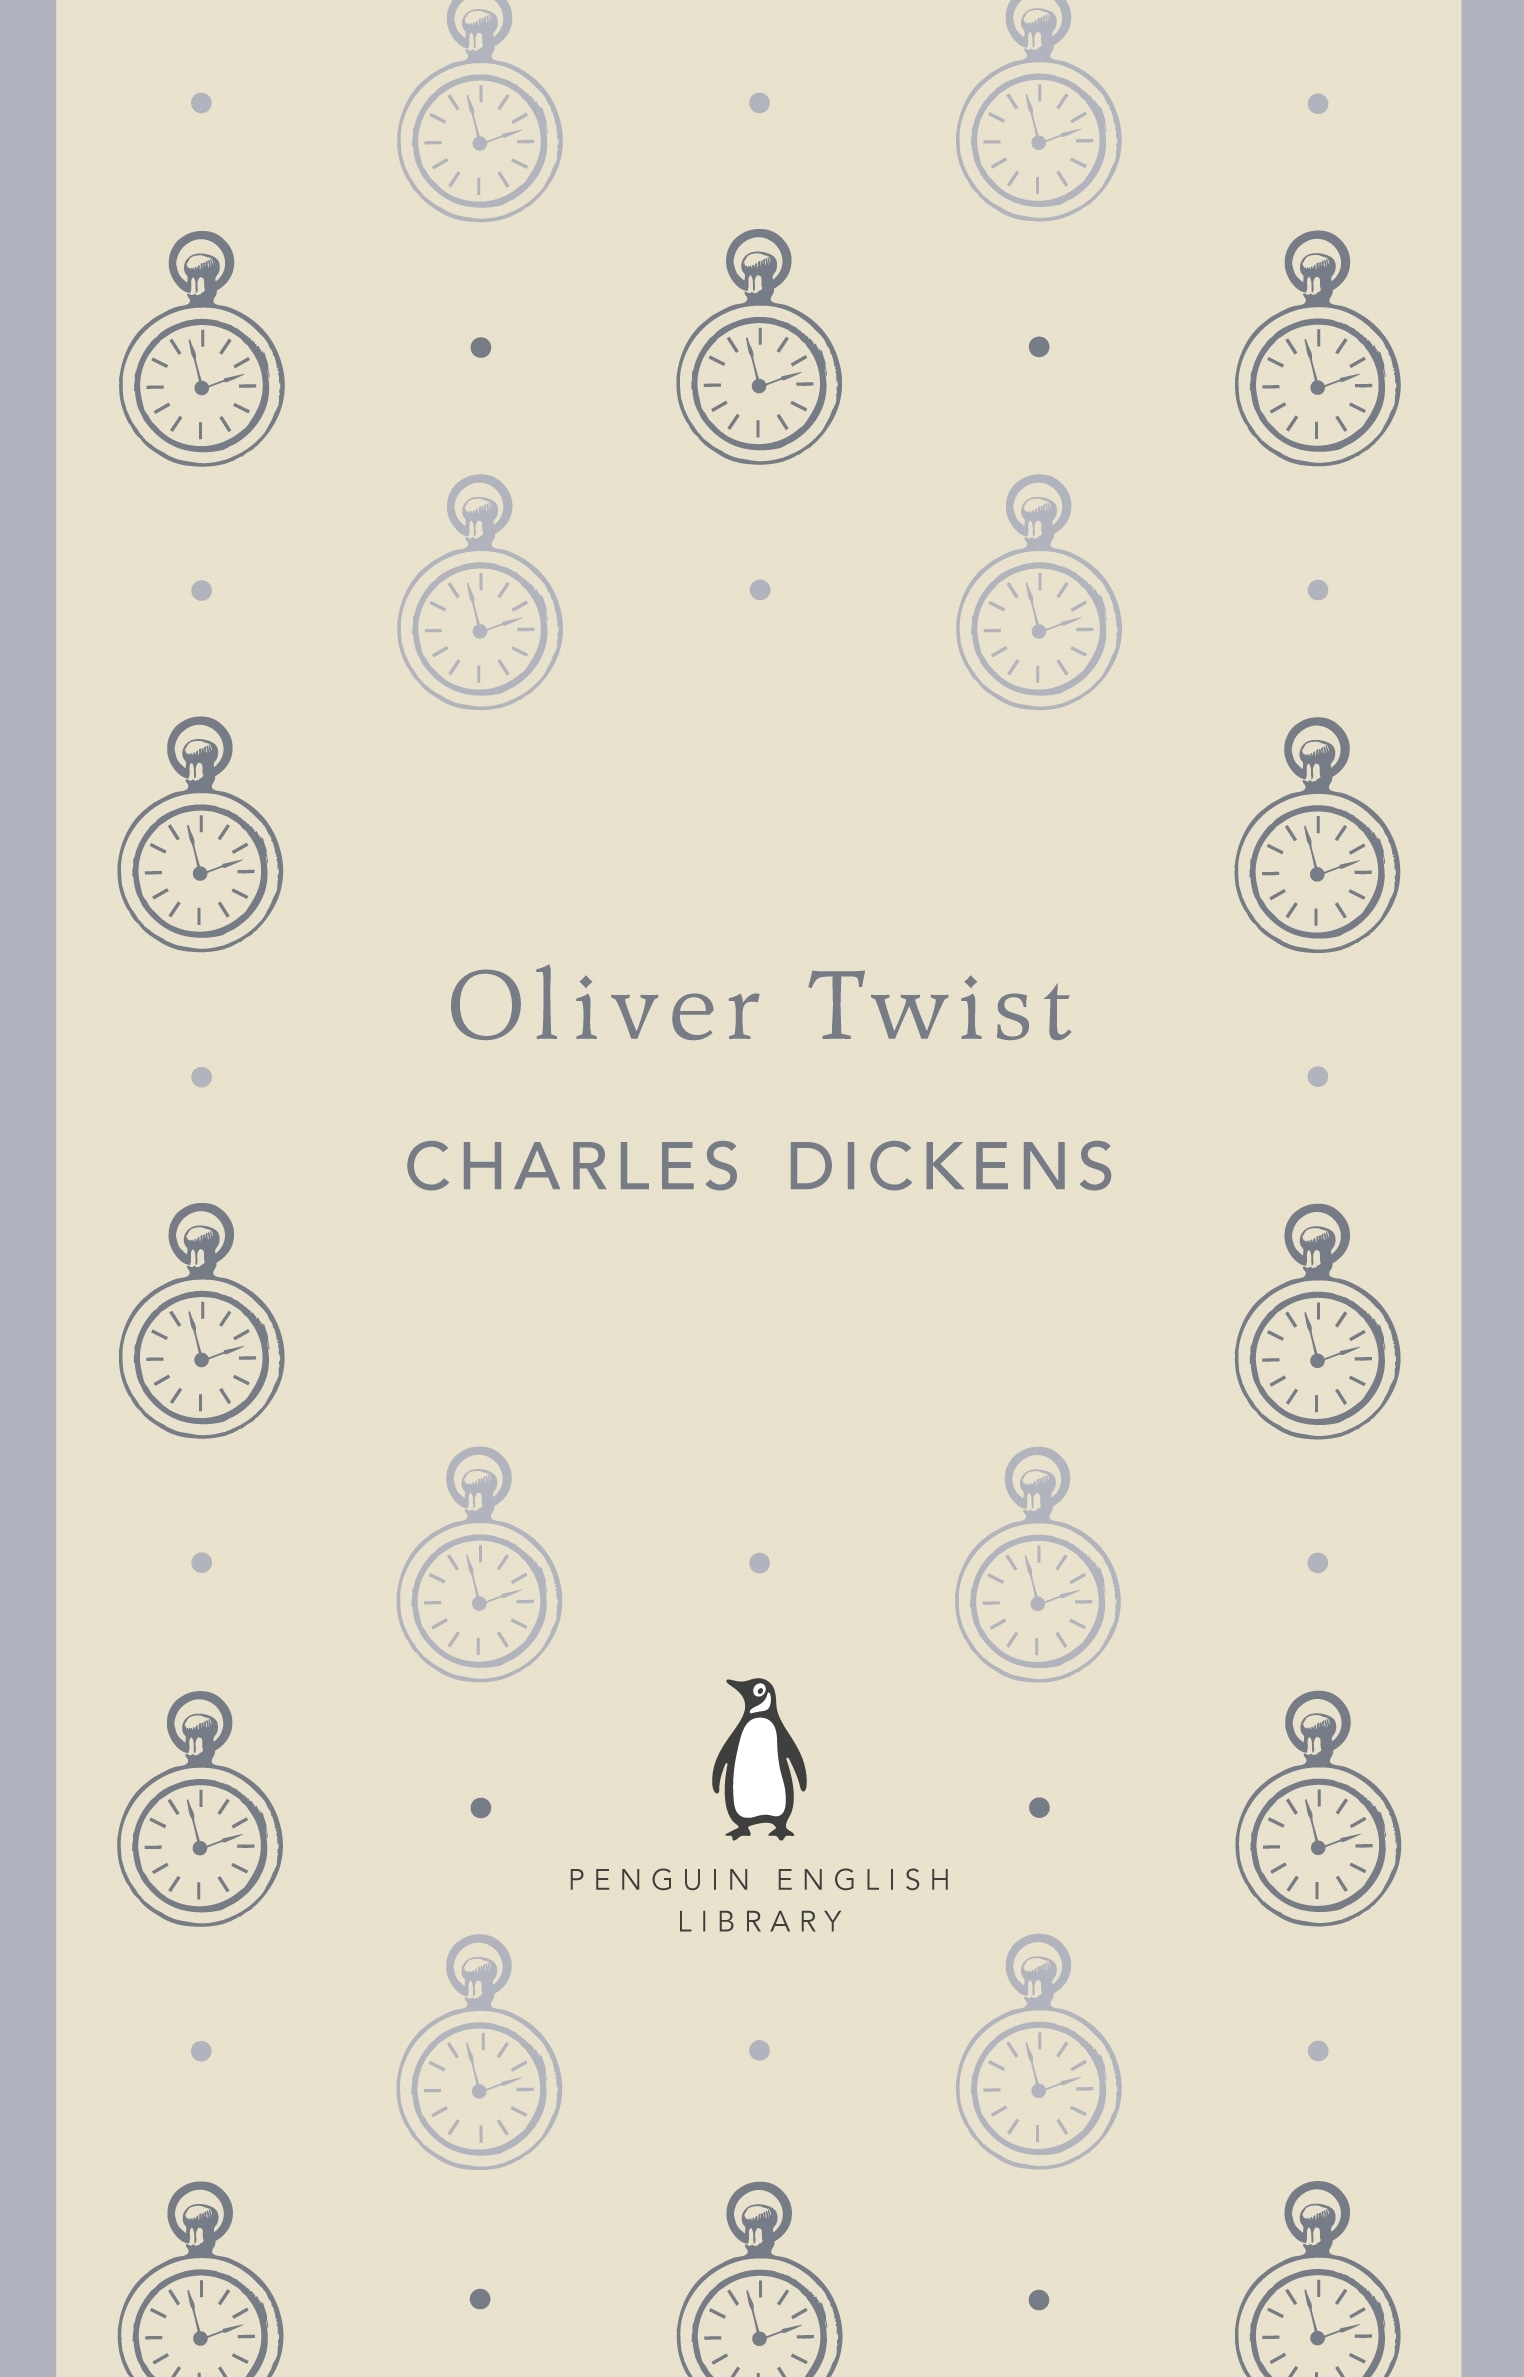 Book “Oliver Twist” by Charles Dickens — April 26, 2012